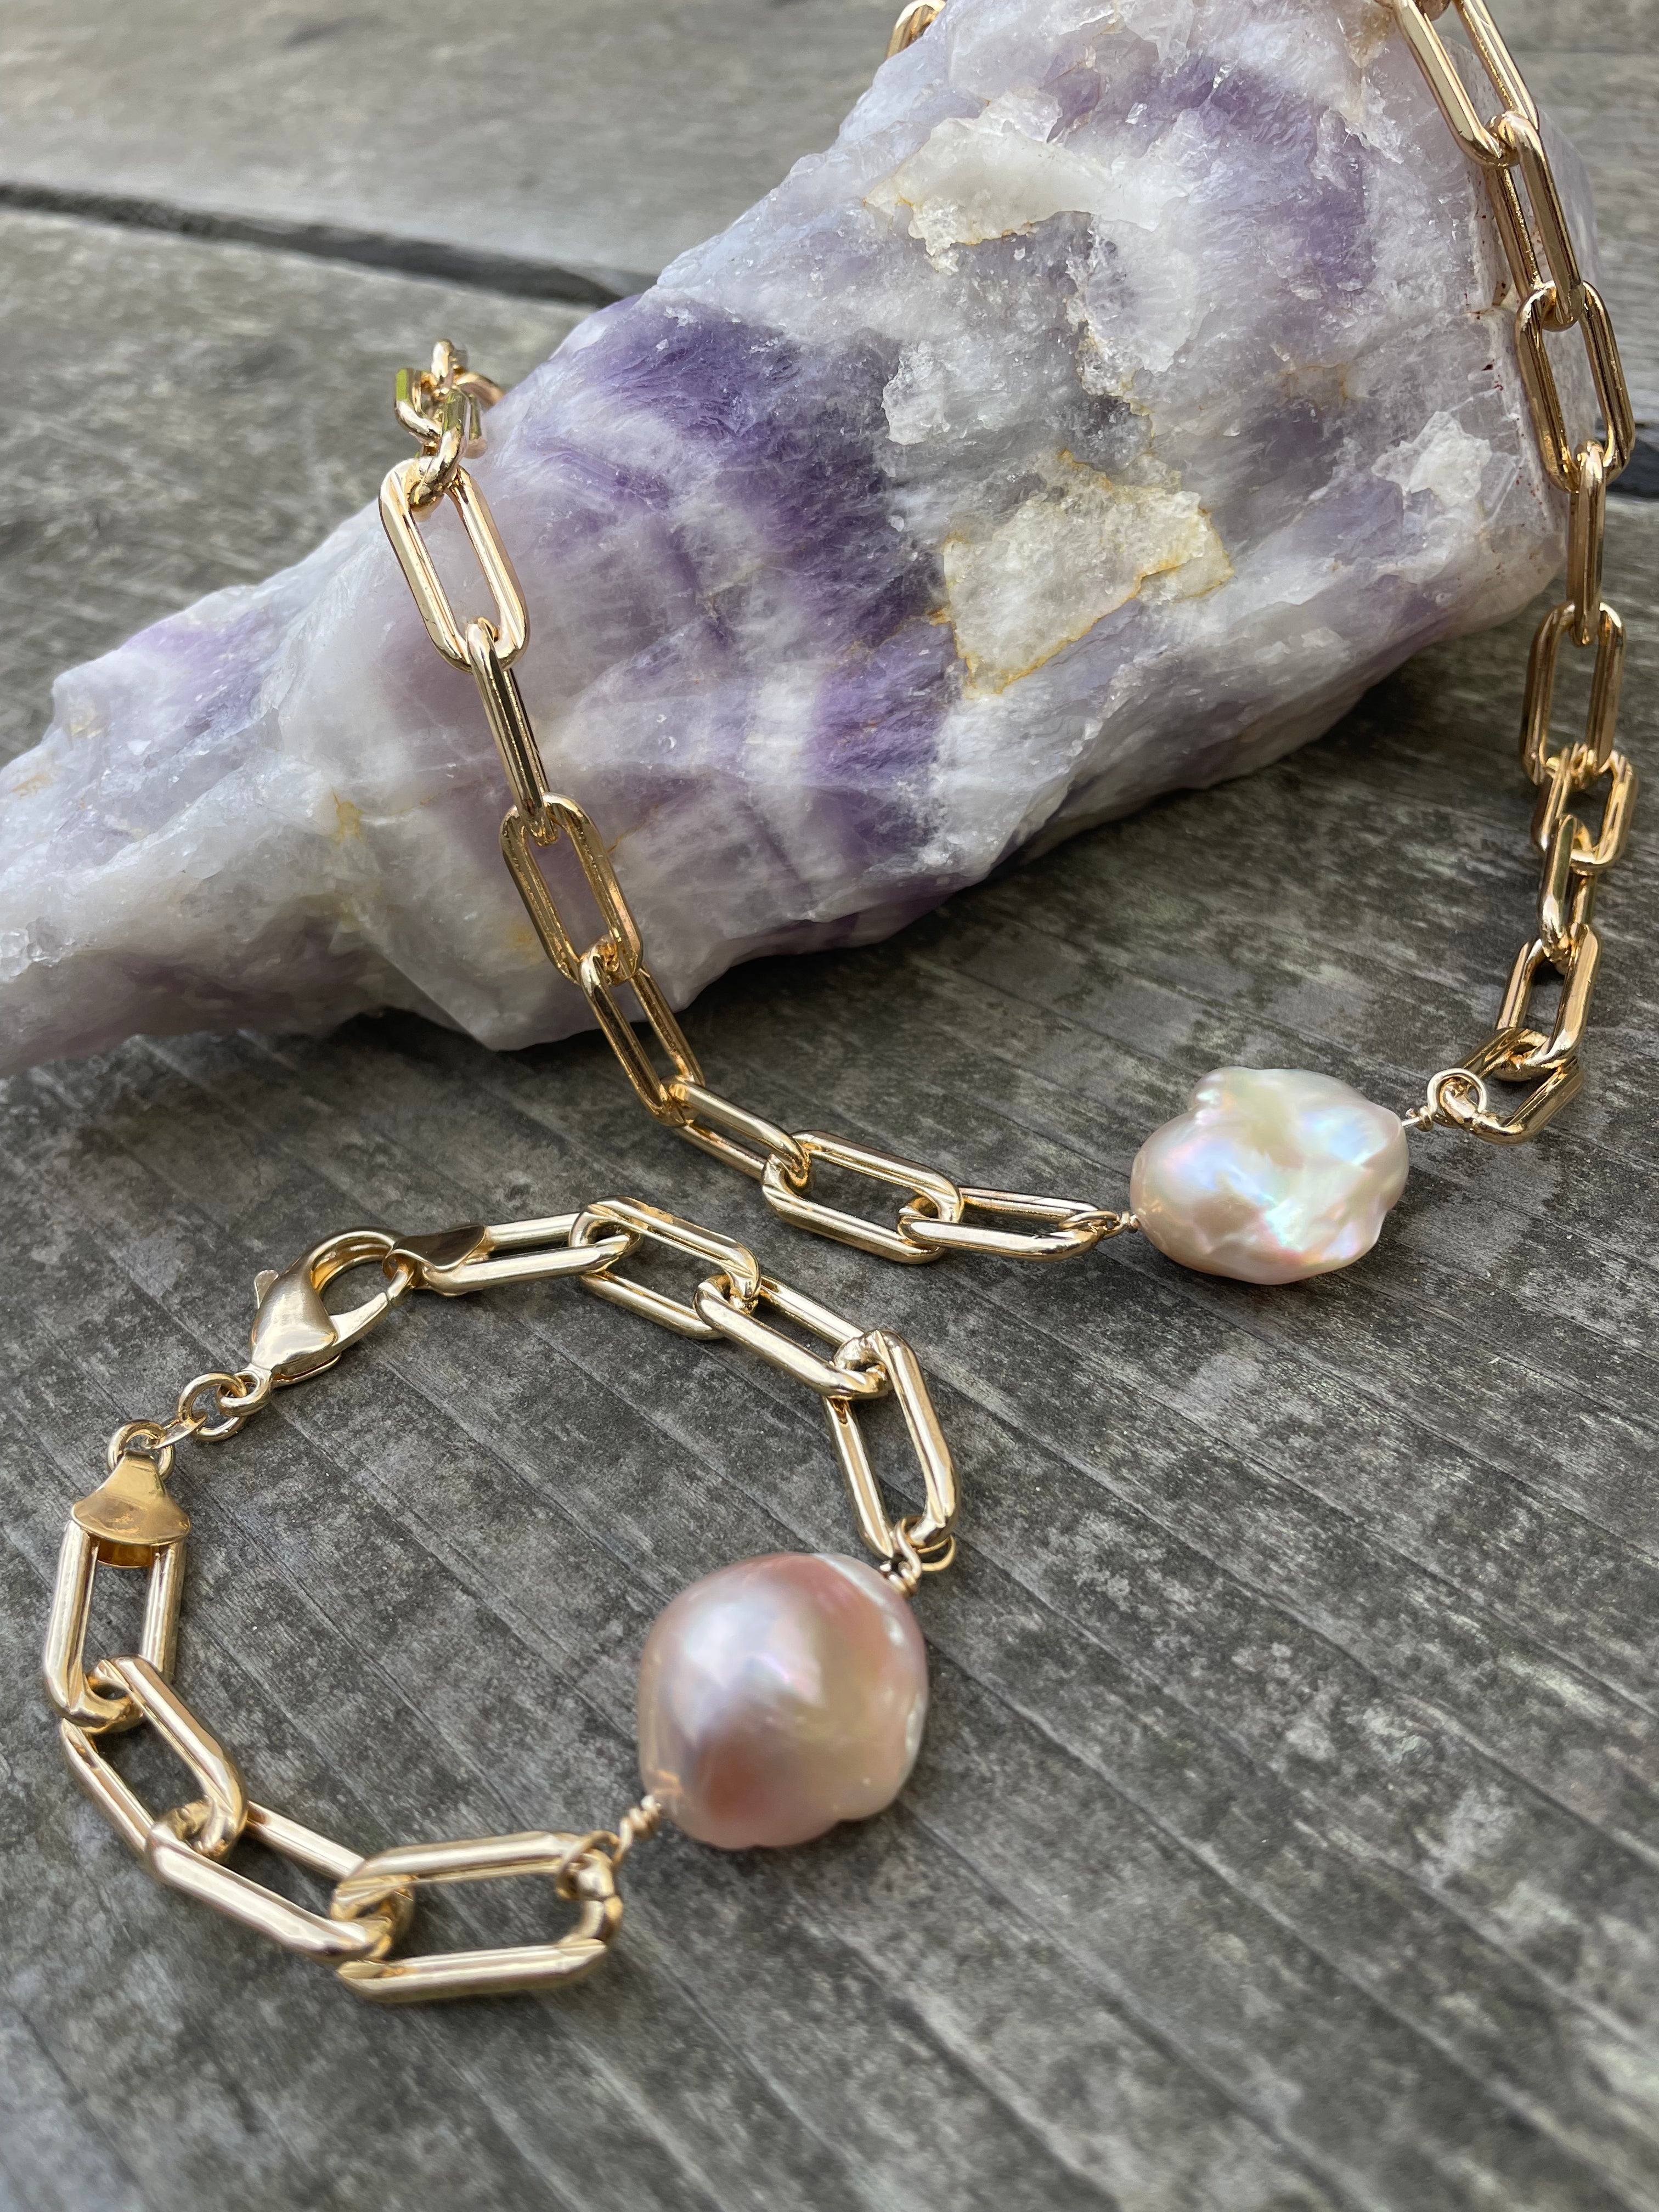 two extra large gold linked chains with large pink fireball shaped pearls laying on a purple crystal on a wooden background. one is a bracelet and the other is a necklace.